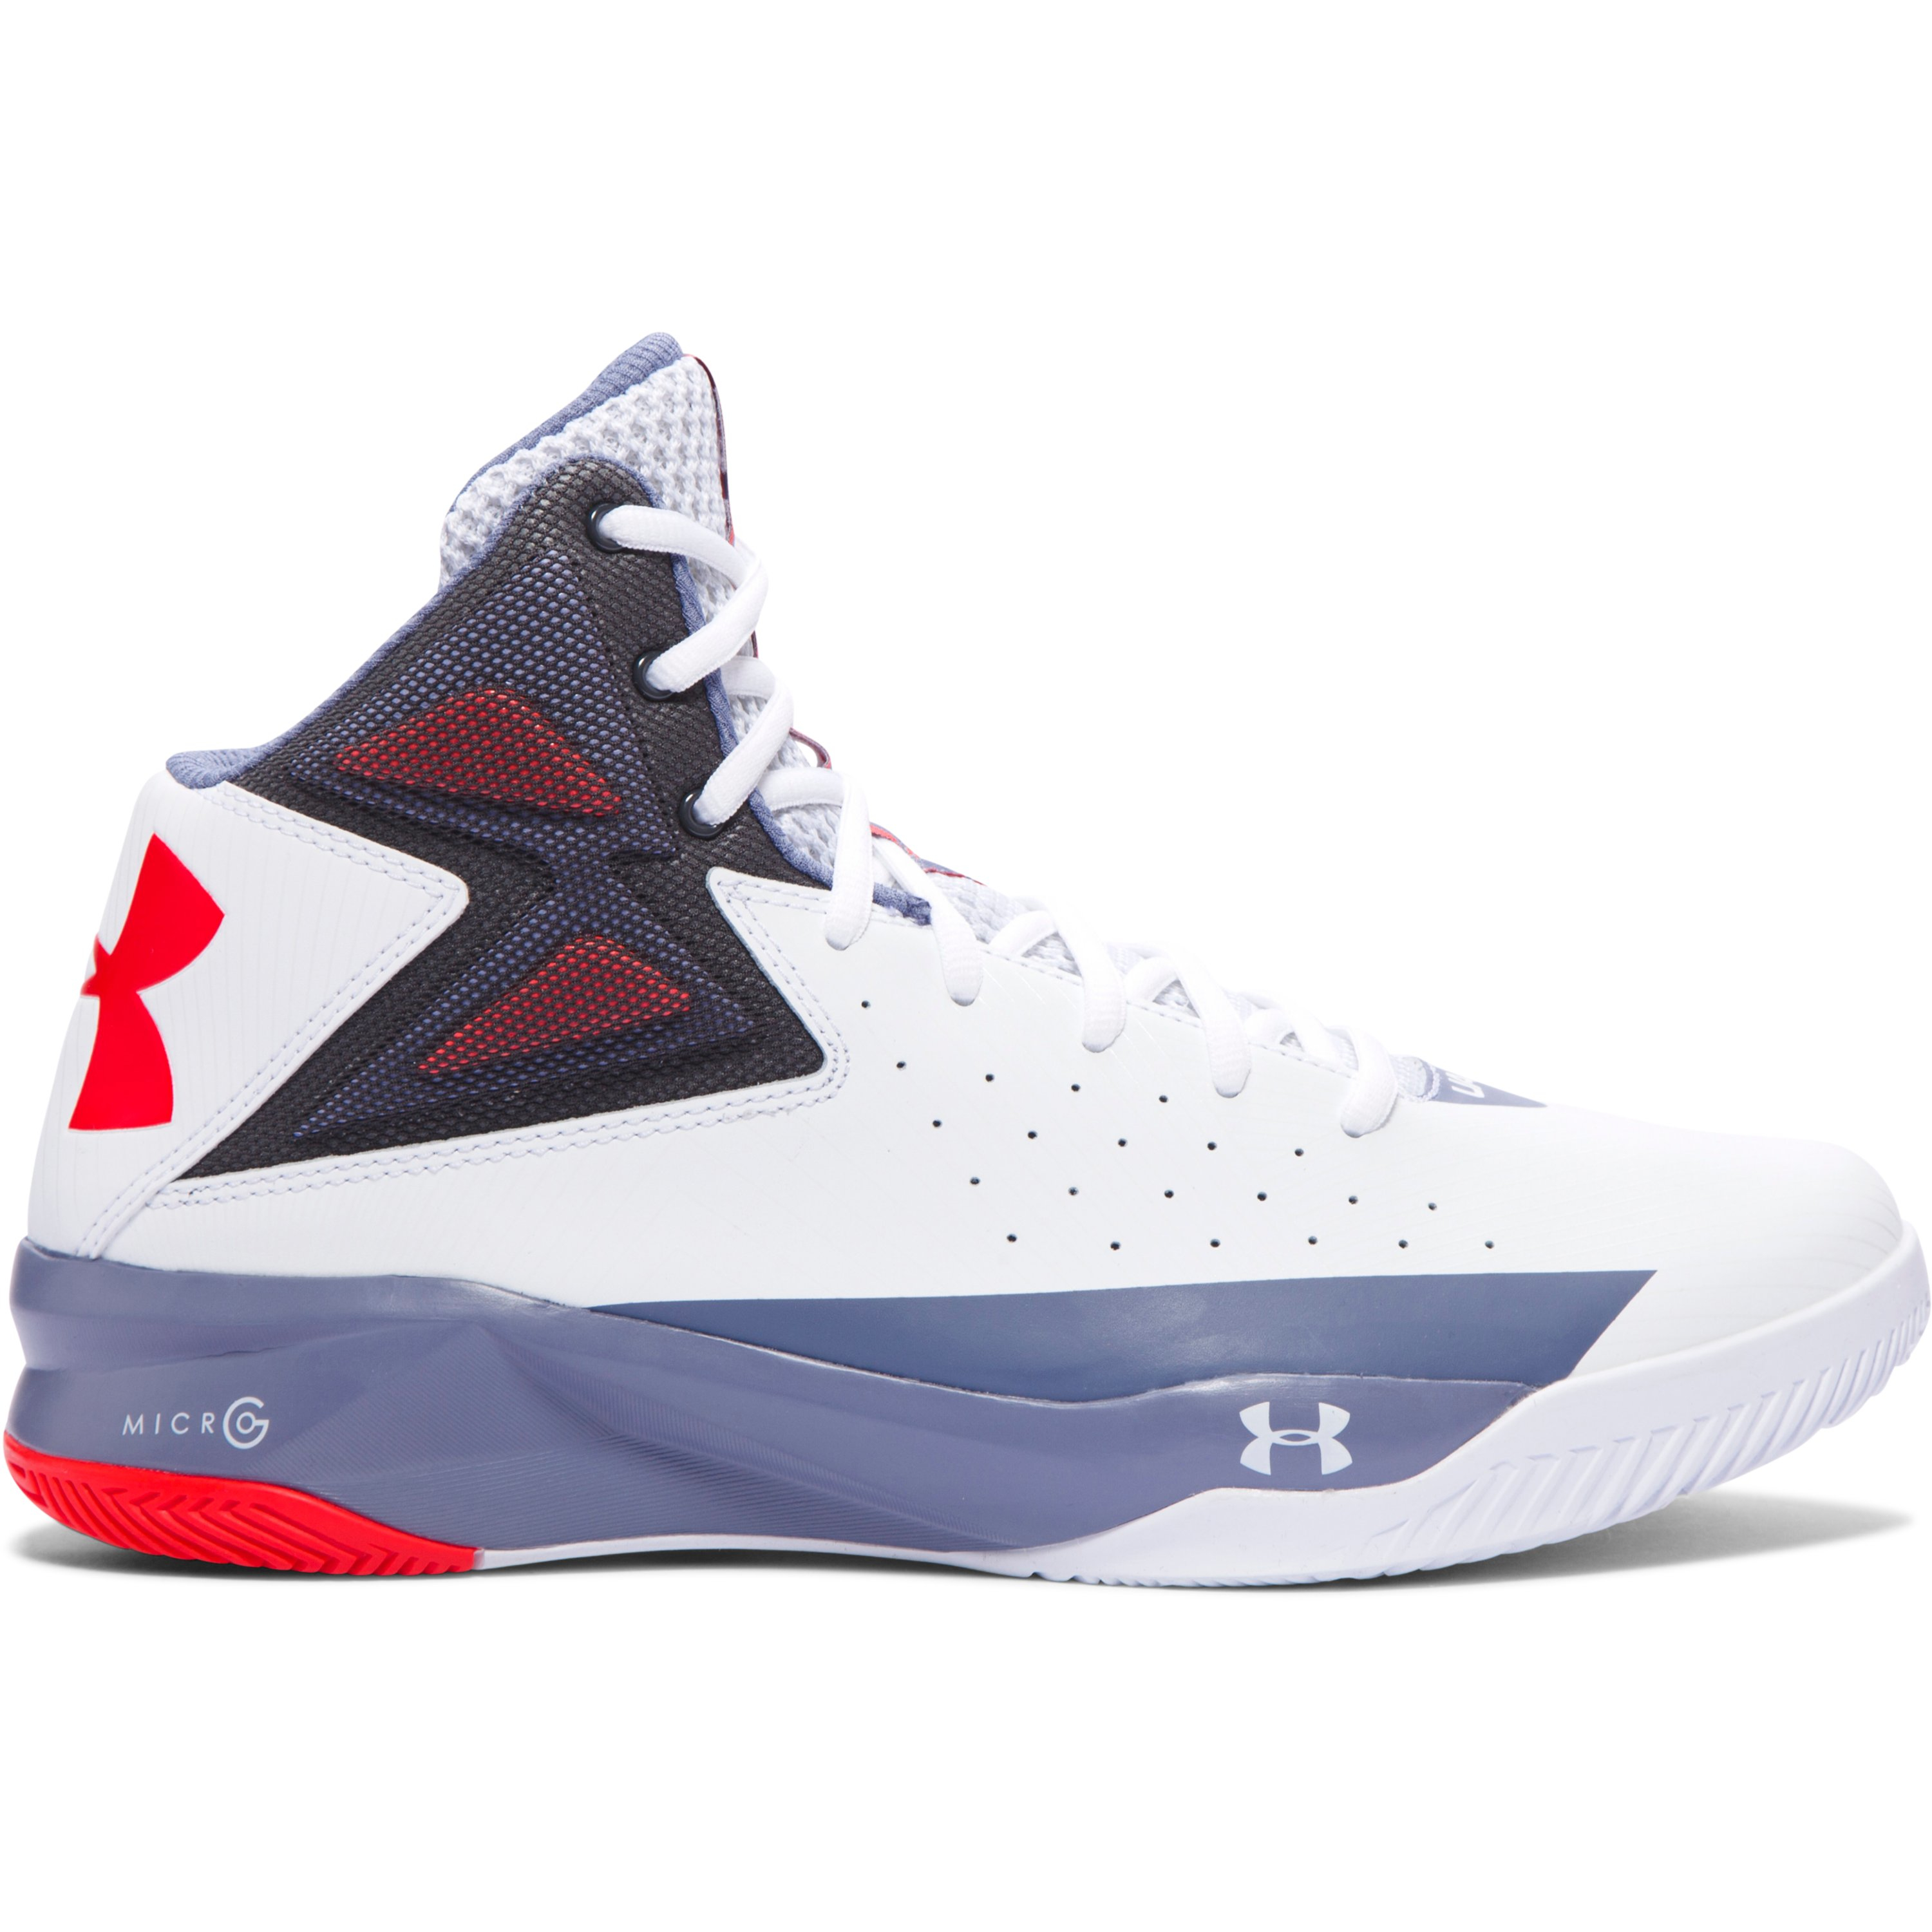 Lyst Under armour Men's Ua Rocket Basketball Shoes in